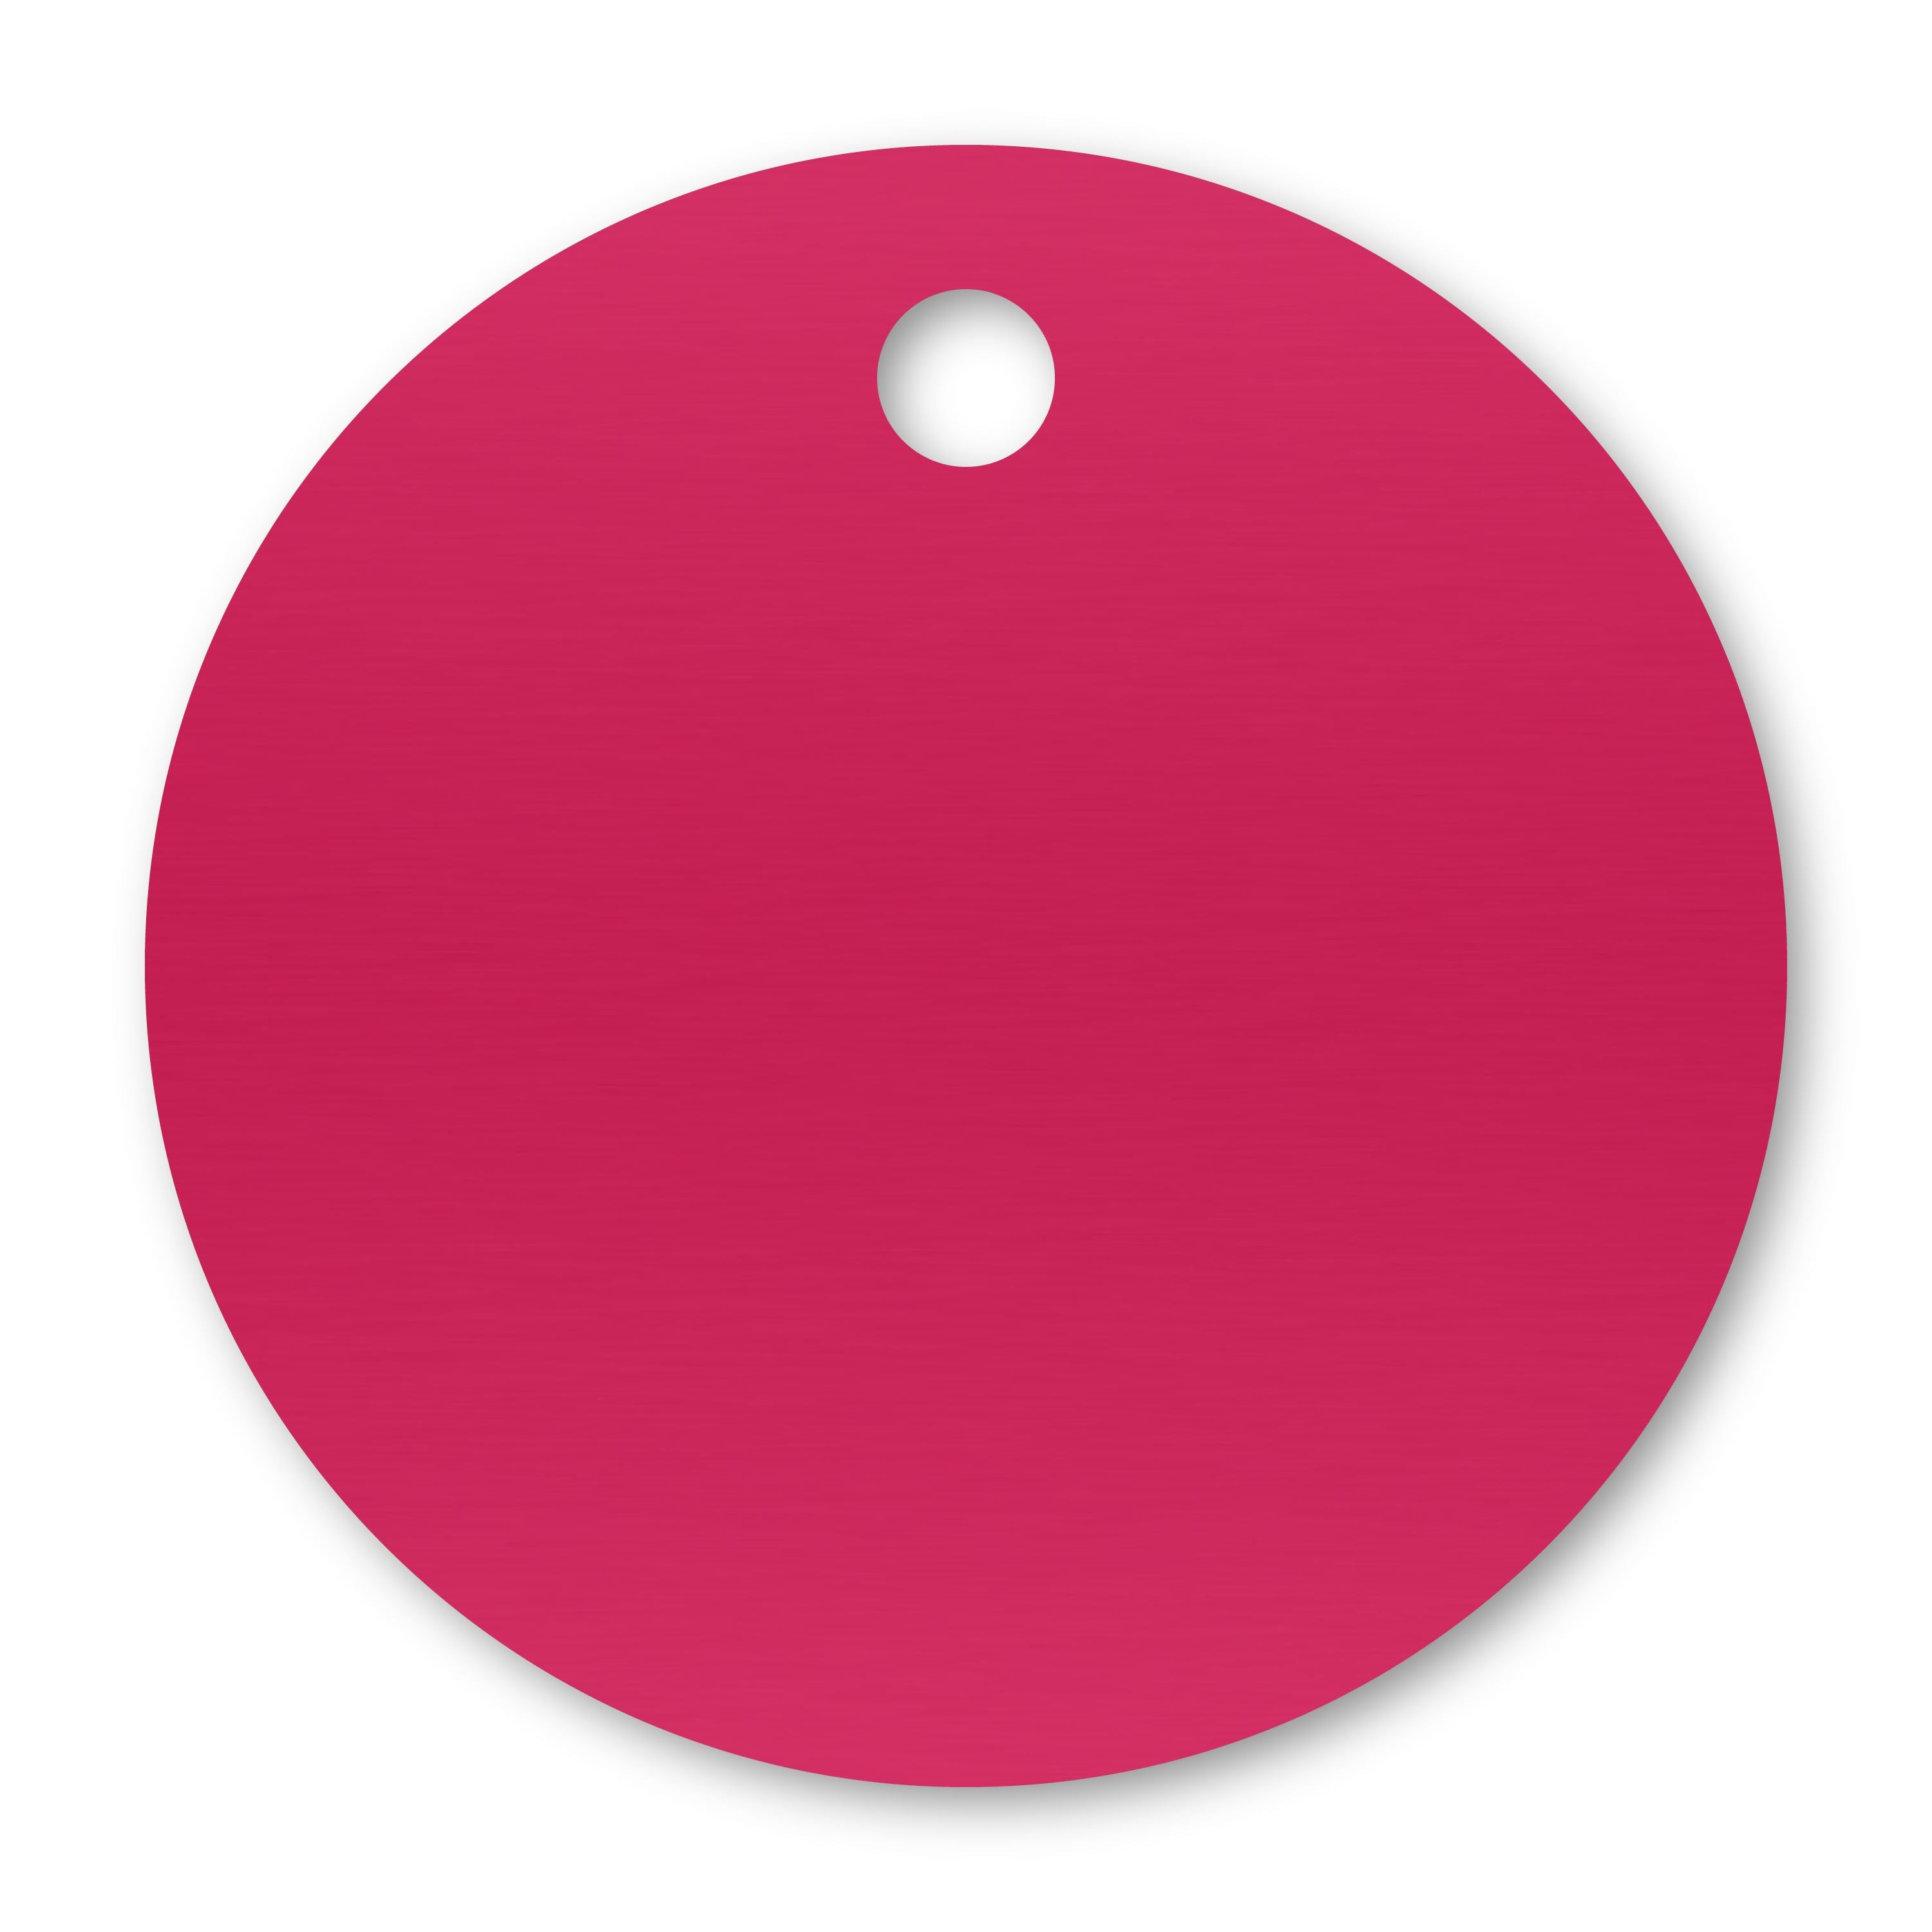 Anodized Aluminum Round Tags, 1-1/2" with 1/8" Hole, Laser Engraved Metal Tags Craftworks NW Pink 